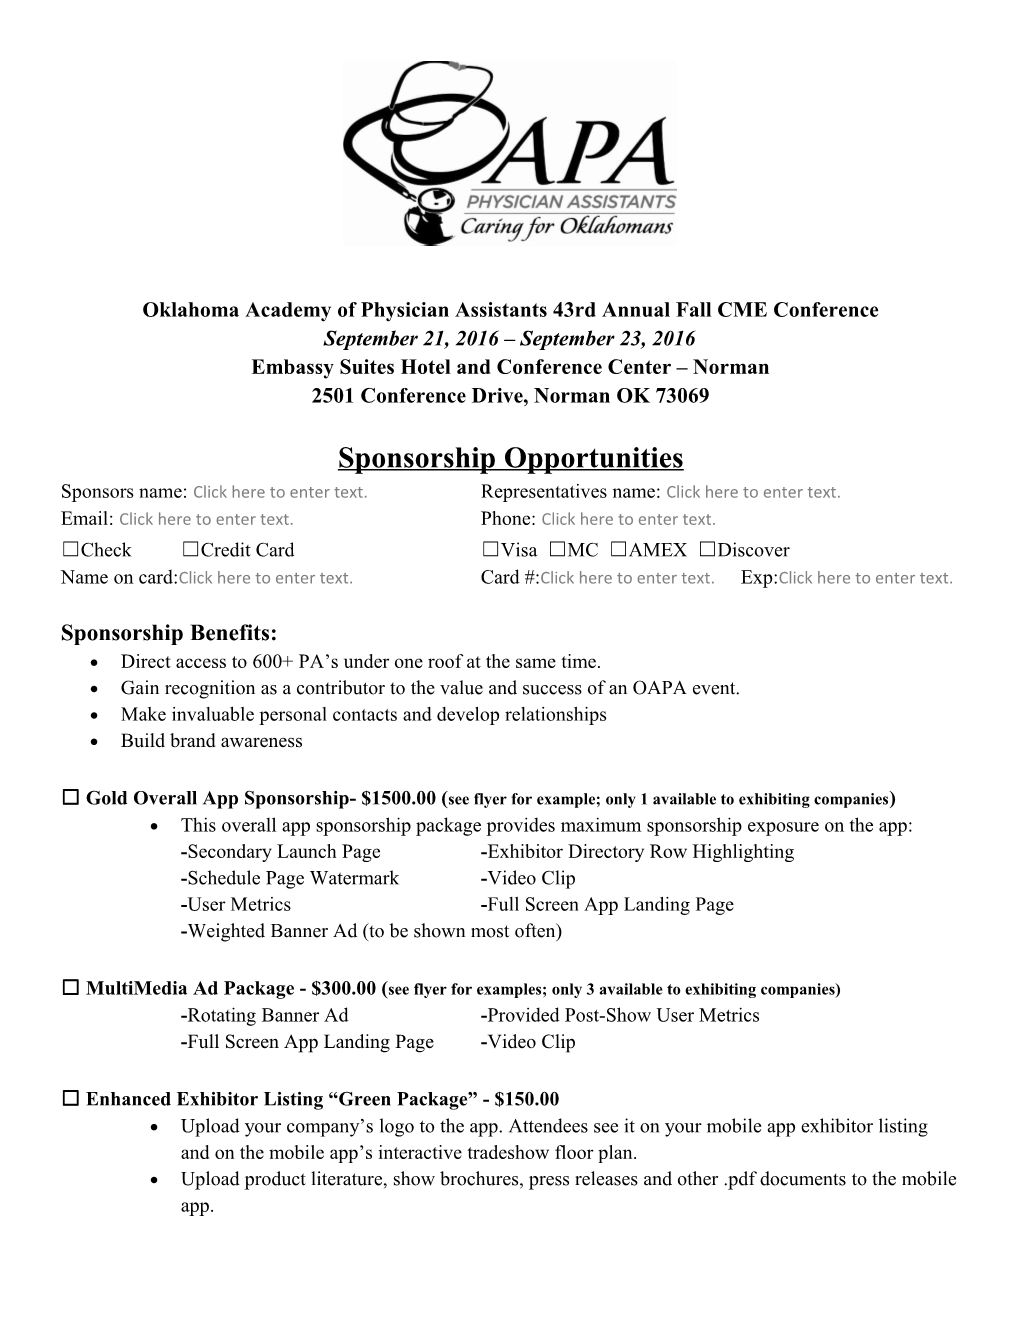 Oklahoma Academy of Physician Assistants 43Rd Annual Fall CME Conference